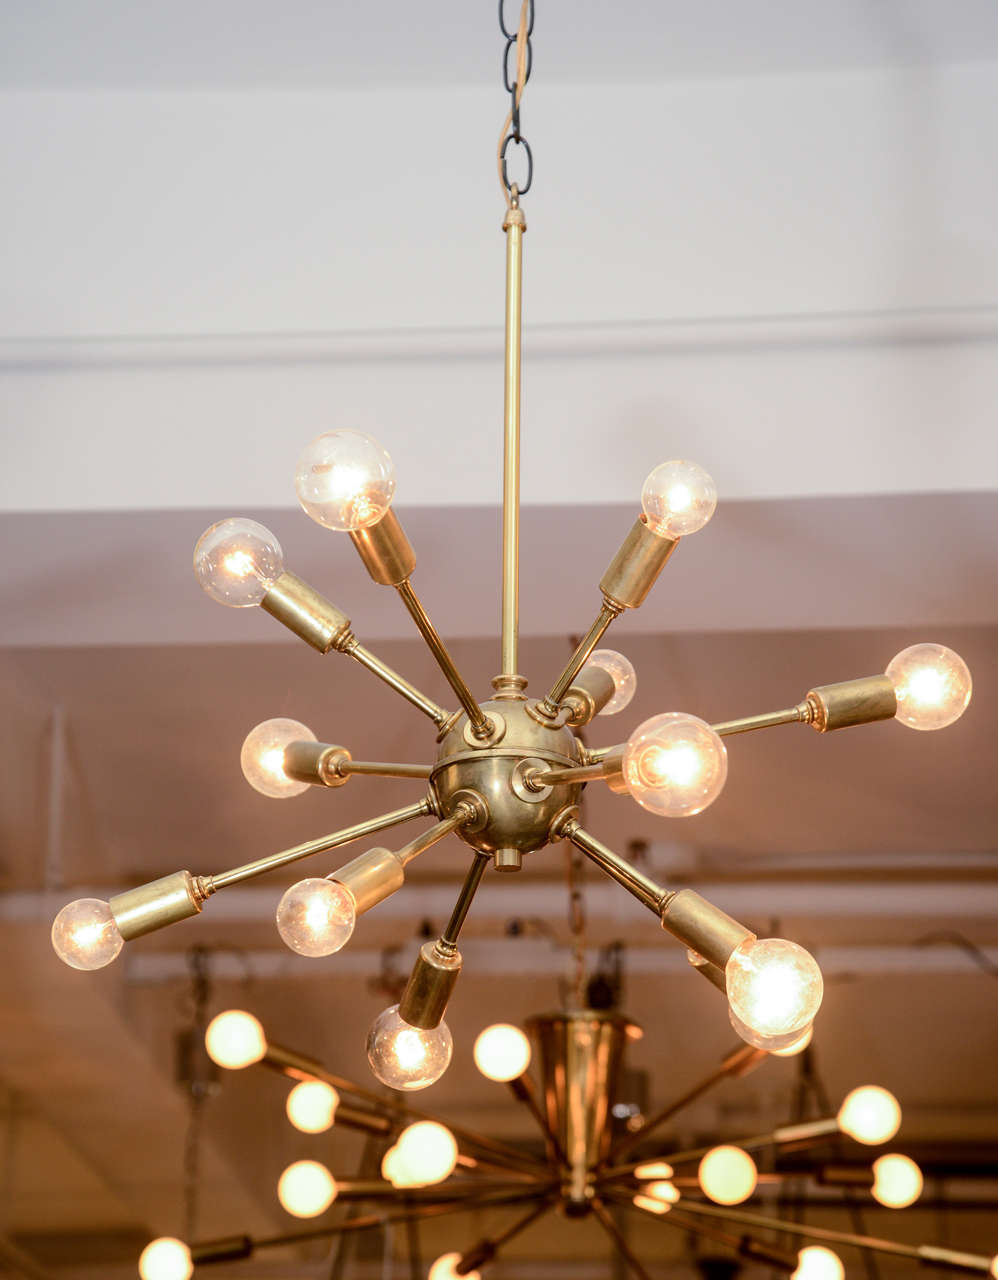 A vintage 10-arm sputnik light fixture in polished brass.  USA, circa 1950.

Fully restored/rewired for the U.S.; fixtures takes 10 candelabra base bulbs, 40 watts max per bulb.

Dimensions:16